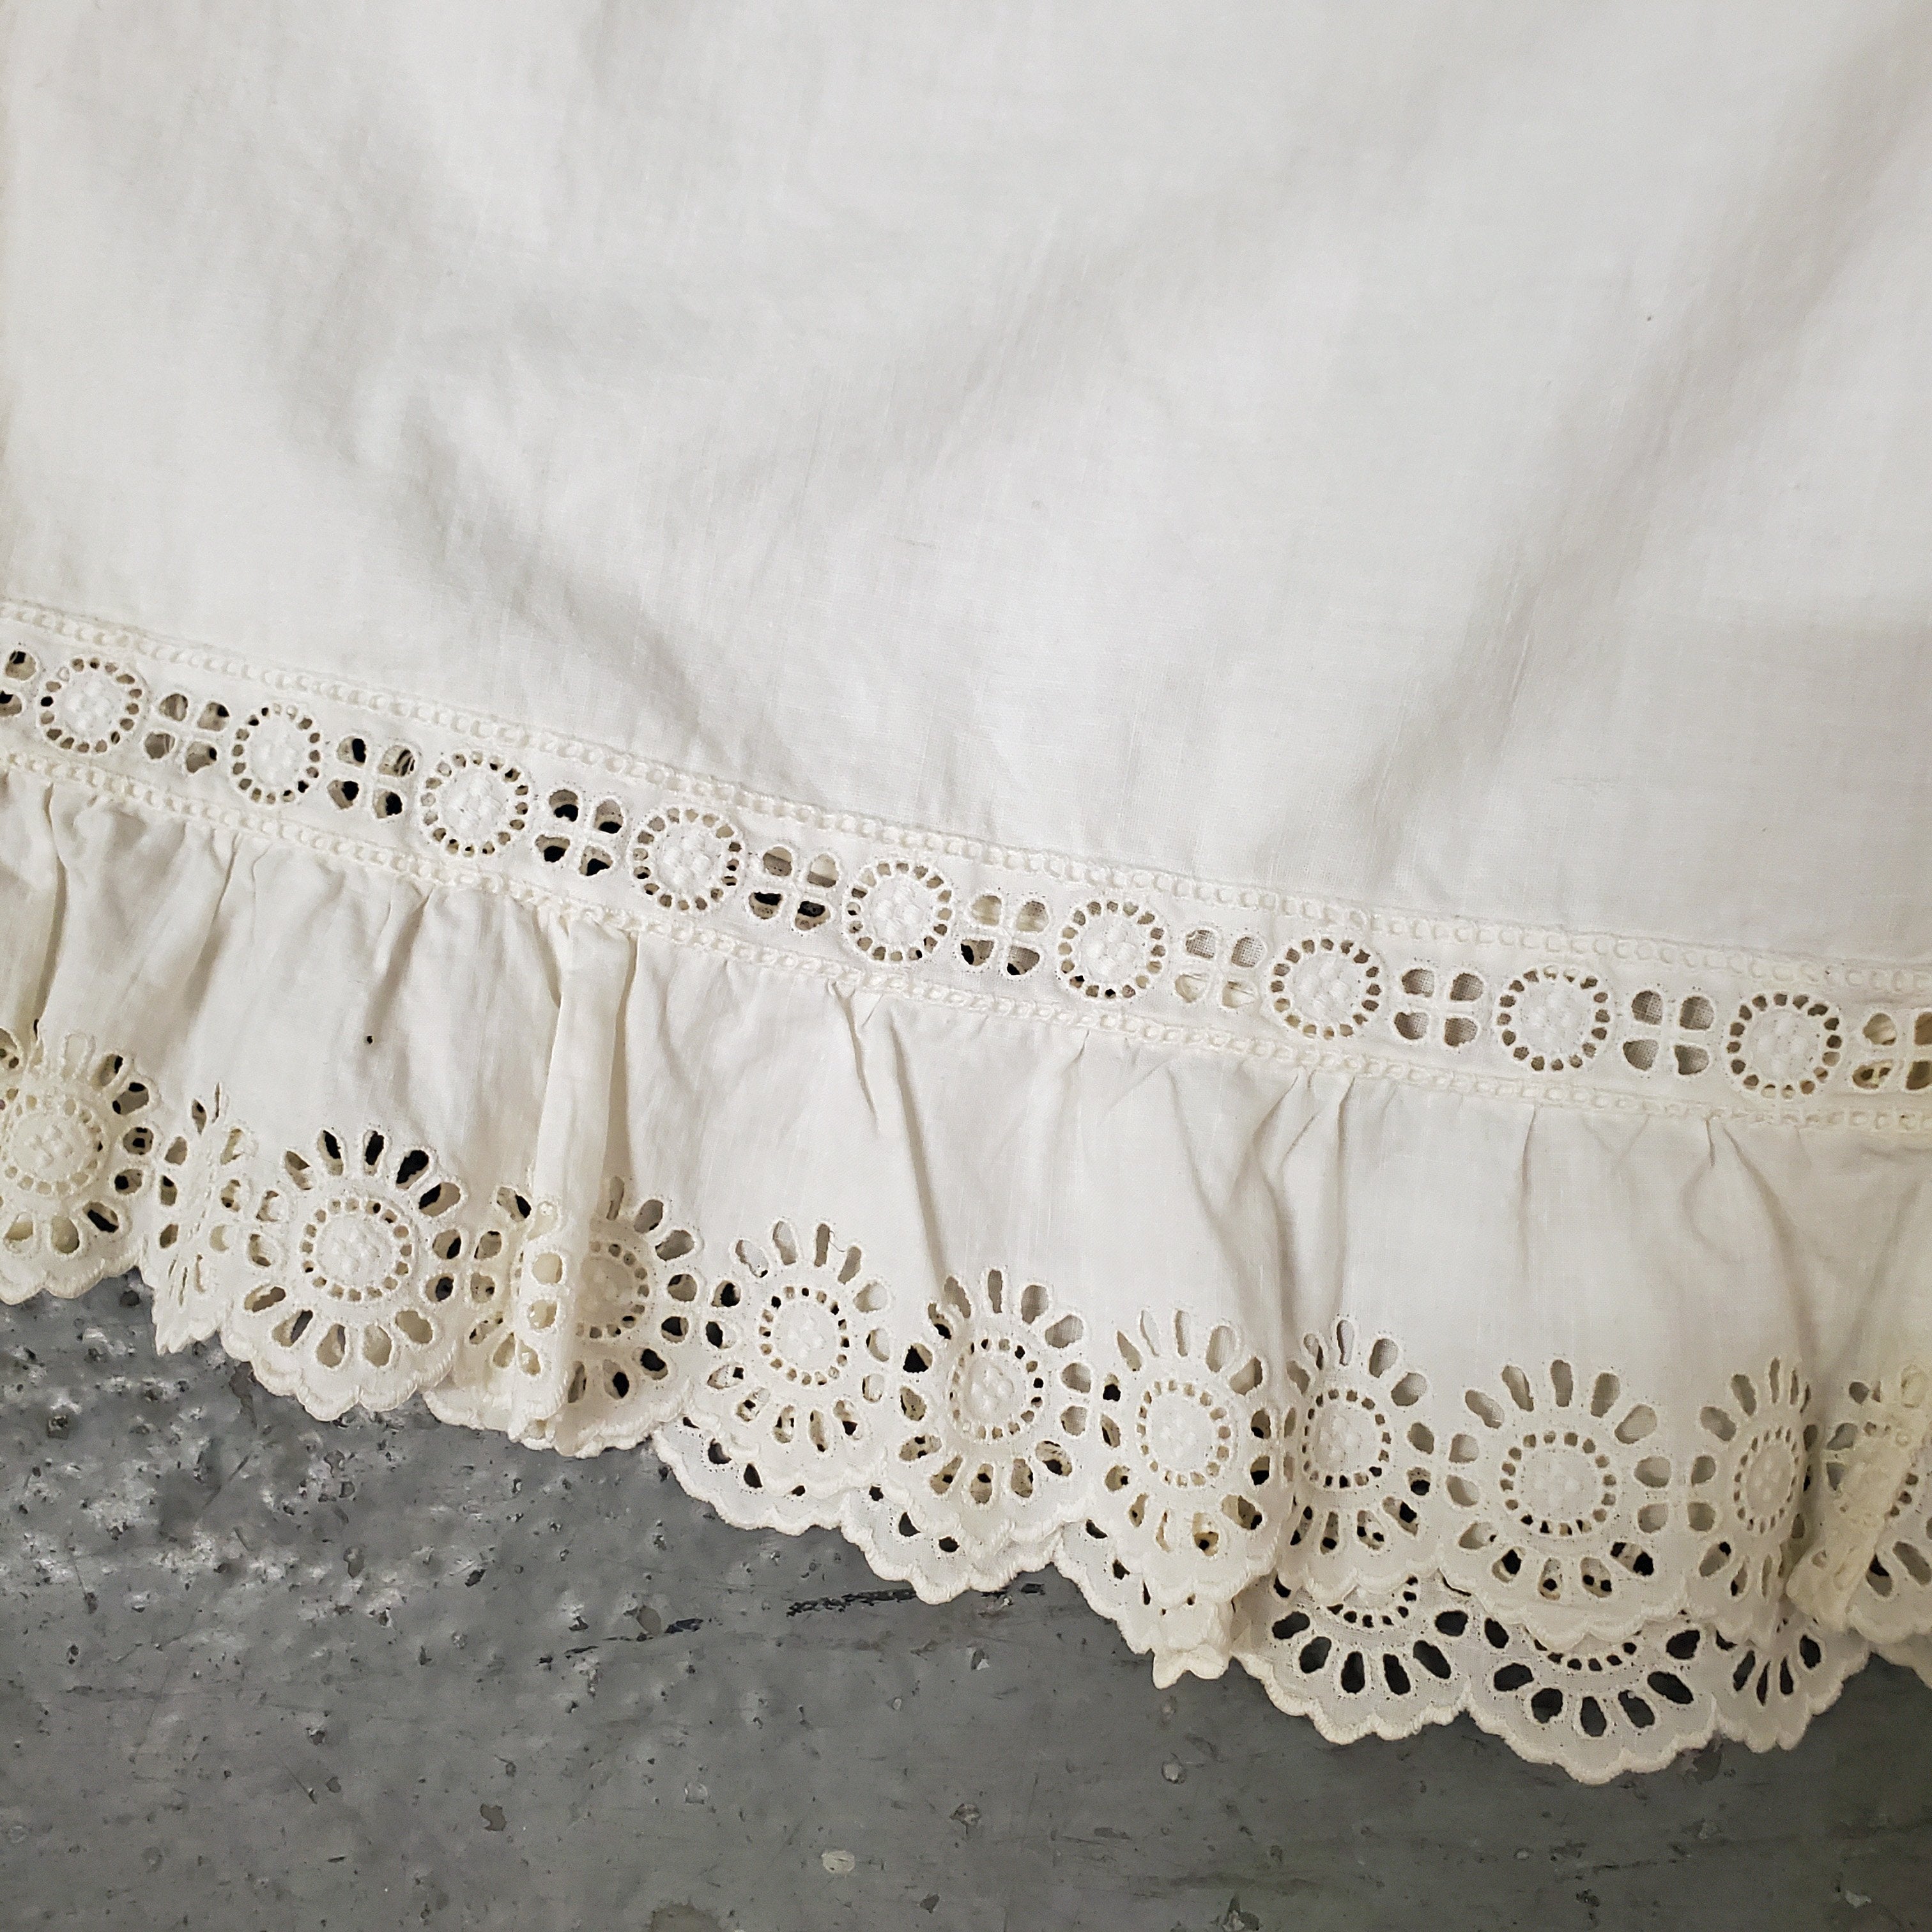 RARE Vintage 1920s 1930s Victorian Eyelet Trimmed Cotton Bloomers Shor ...